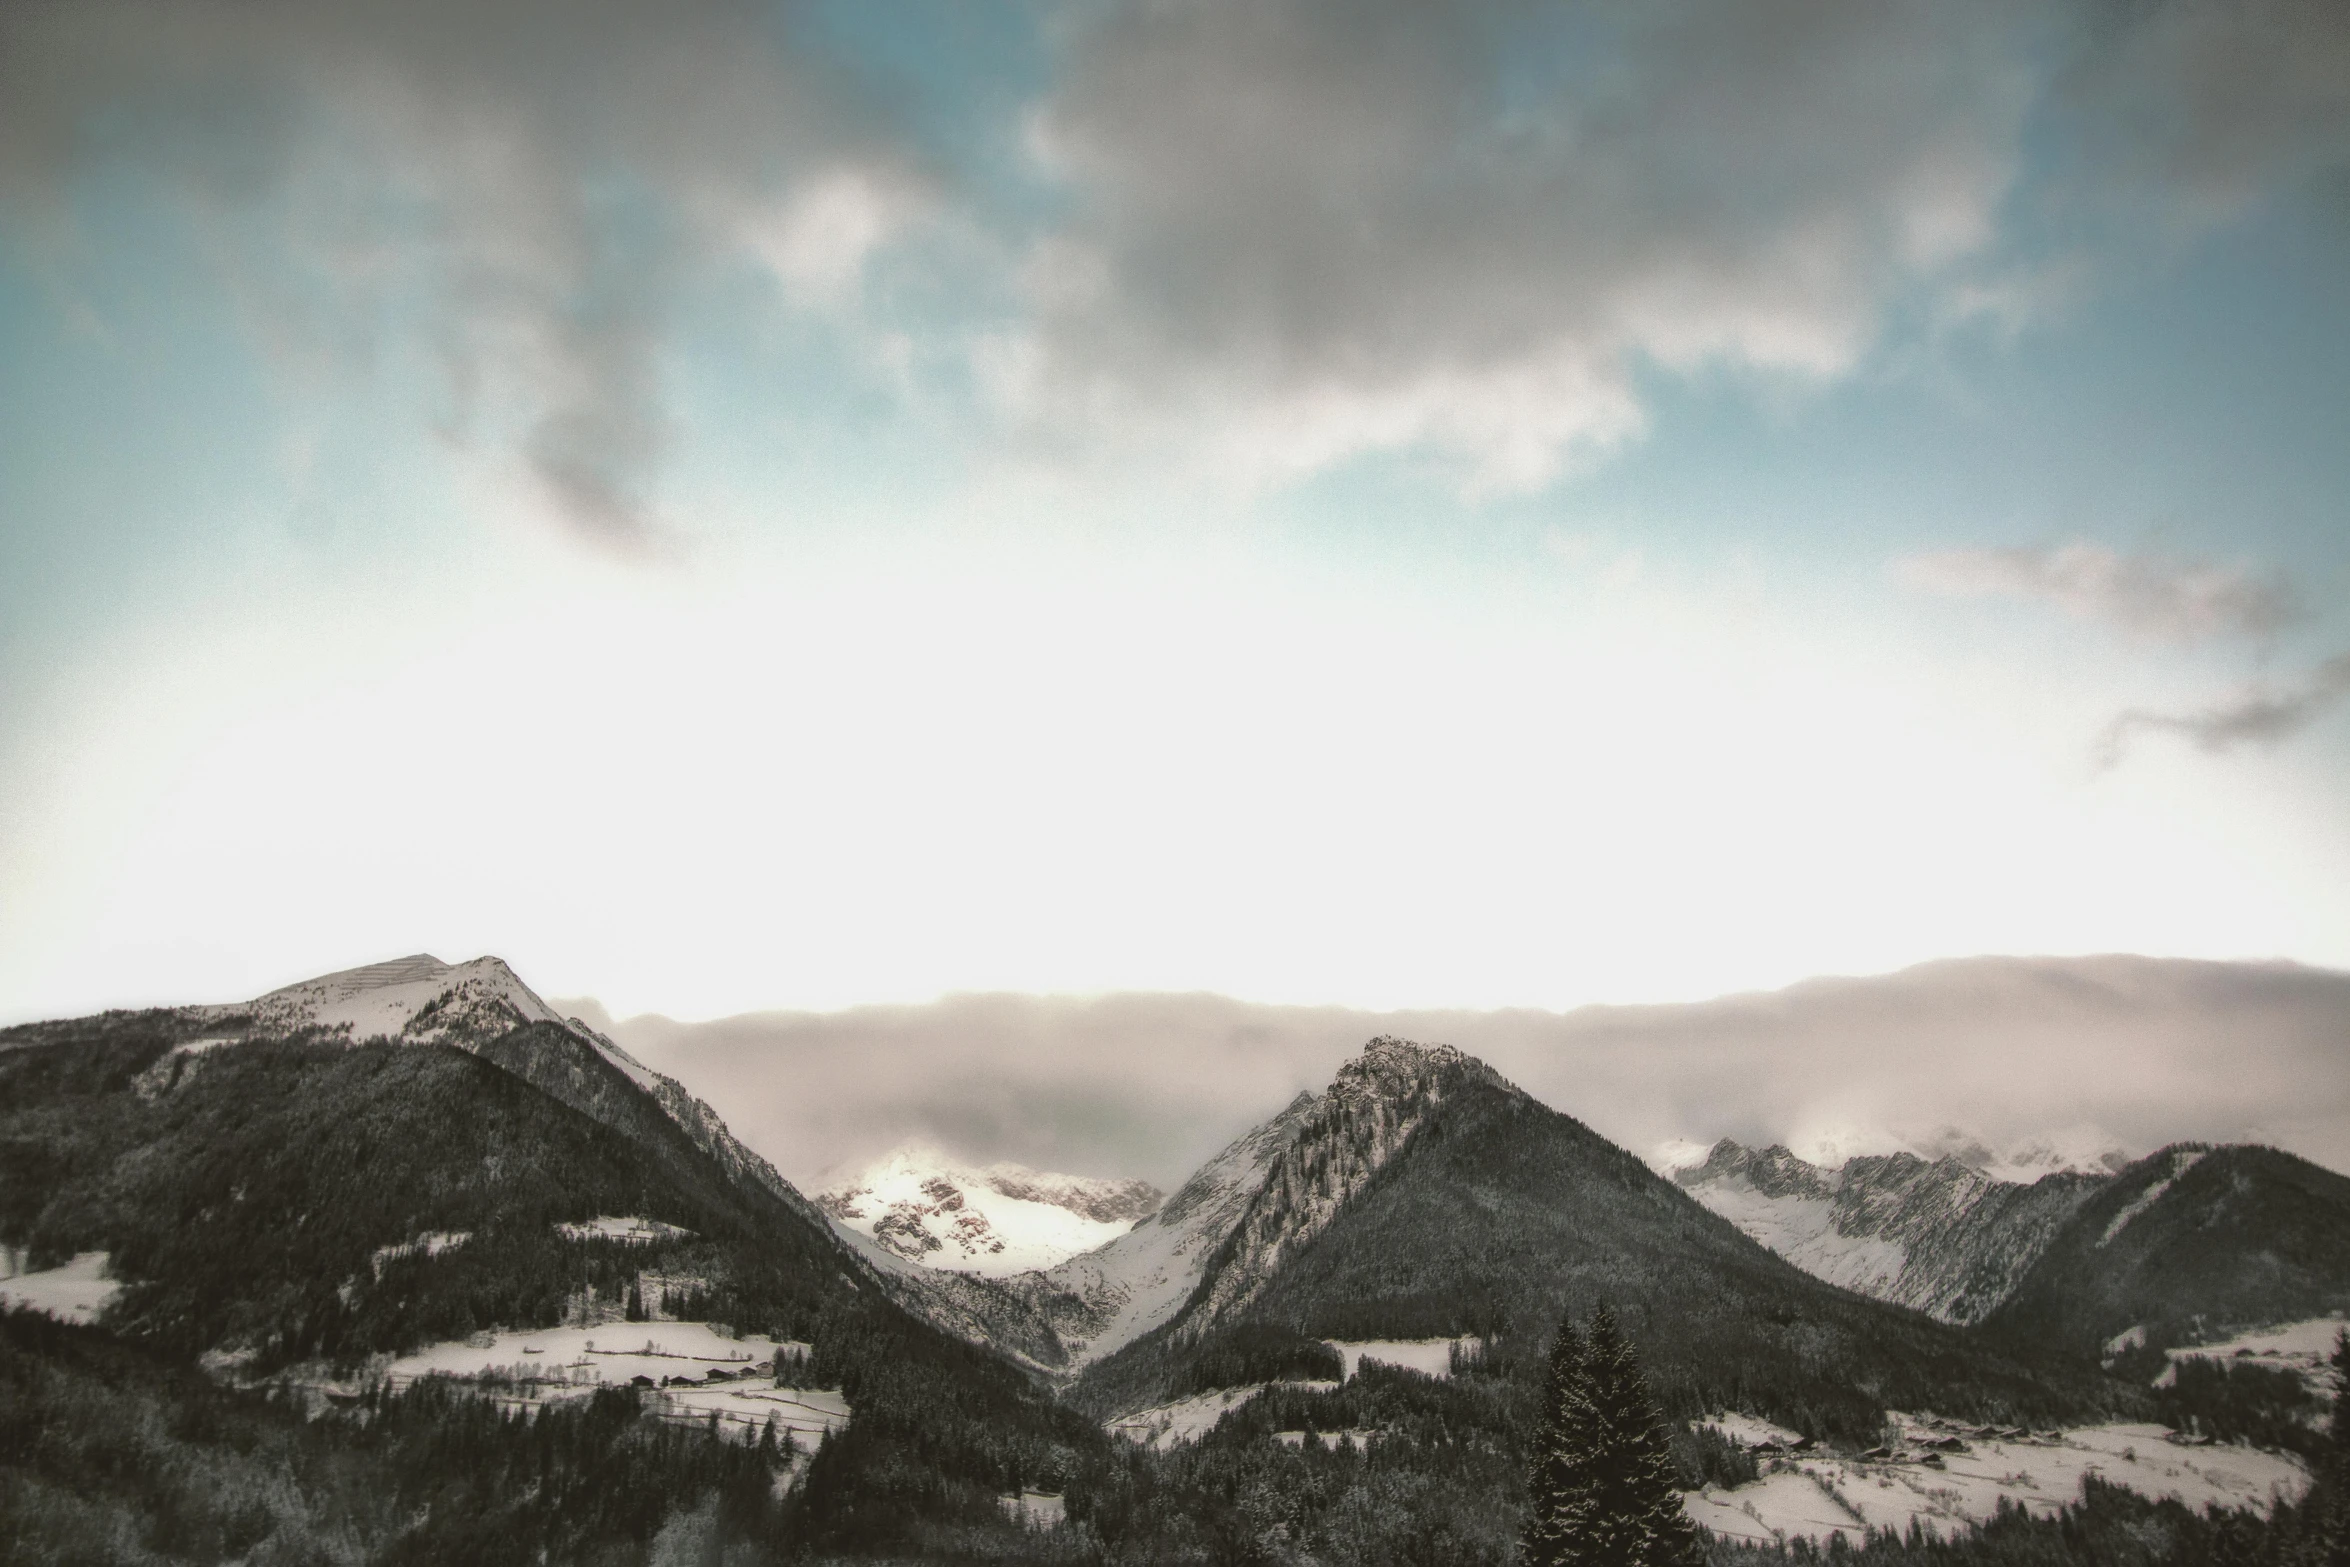 a man riding a snowboard down a snow covered slope, a picture, pexels contest winner, visual art, ominous! landscape of north bend, distant mountains lights photo, gray clouds, landscape wallpaper